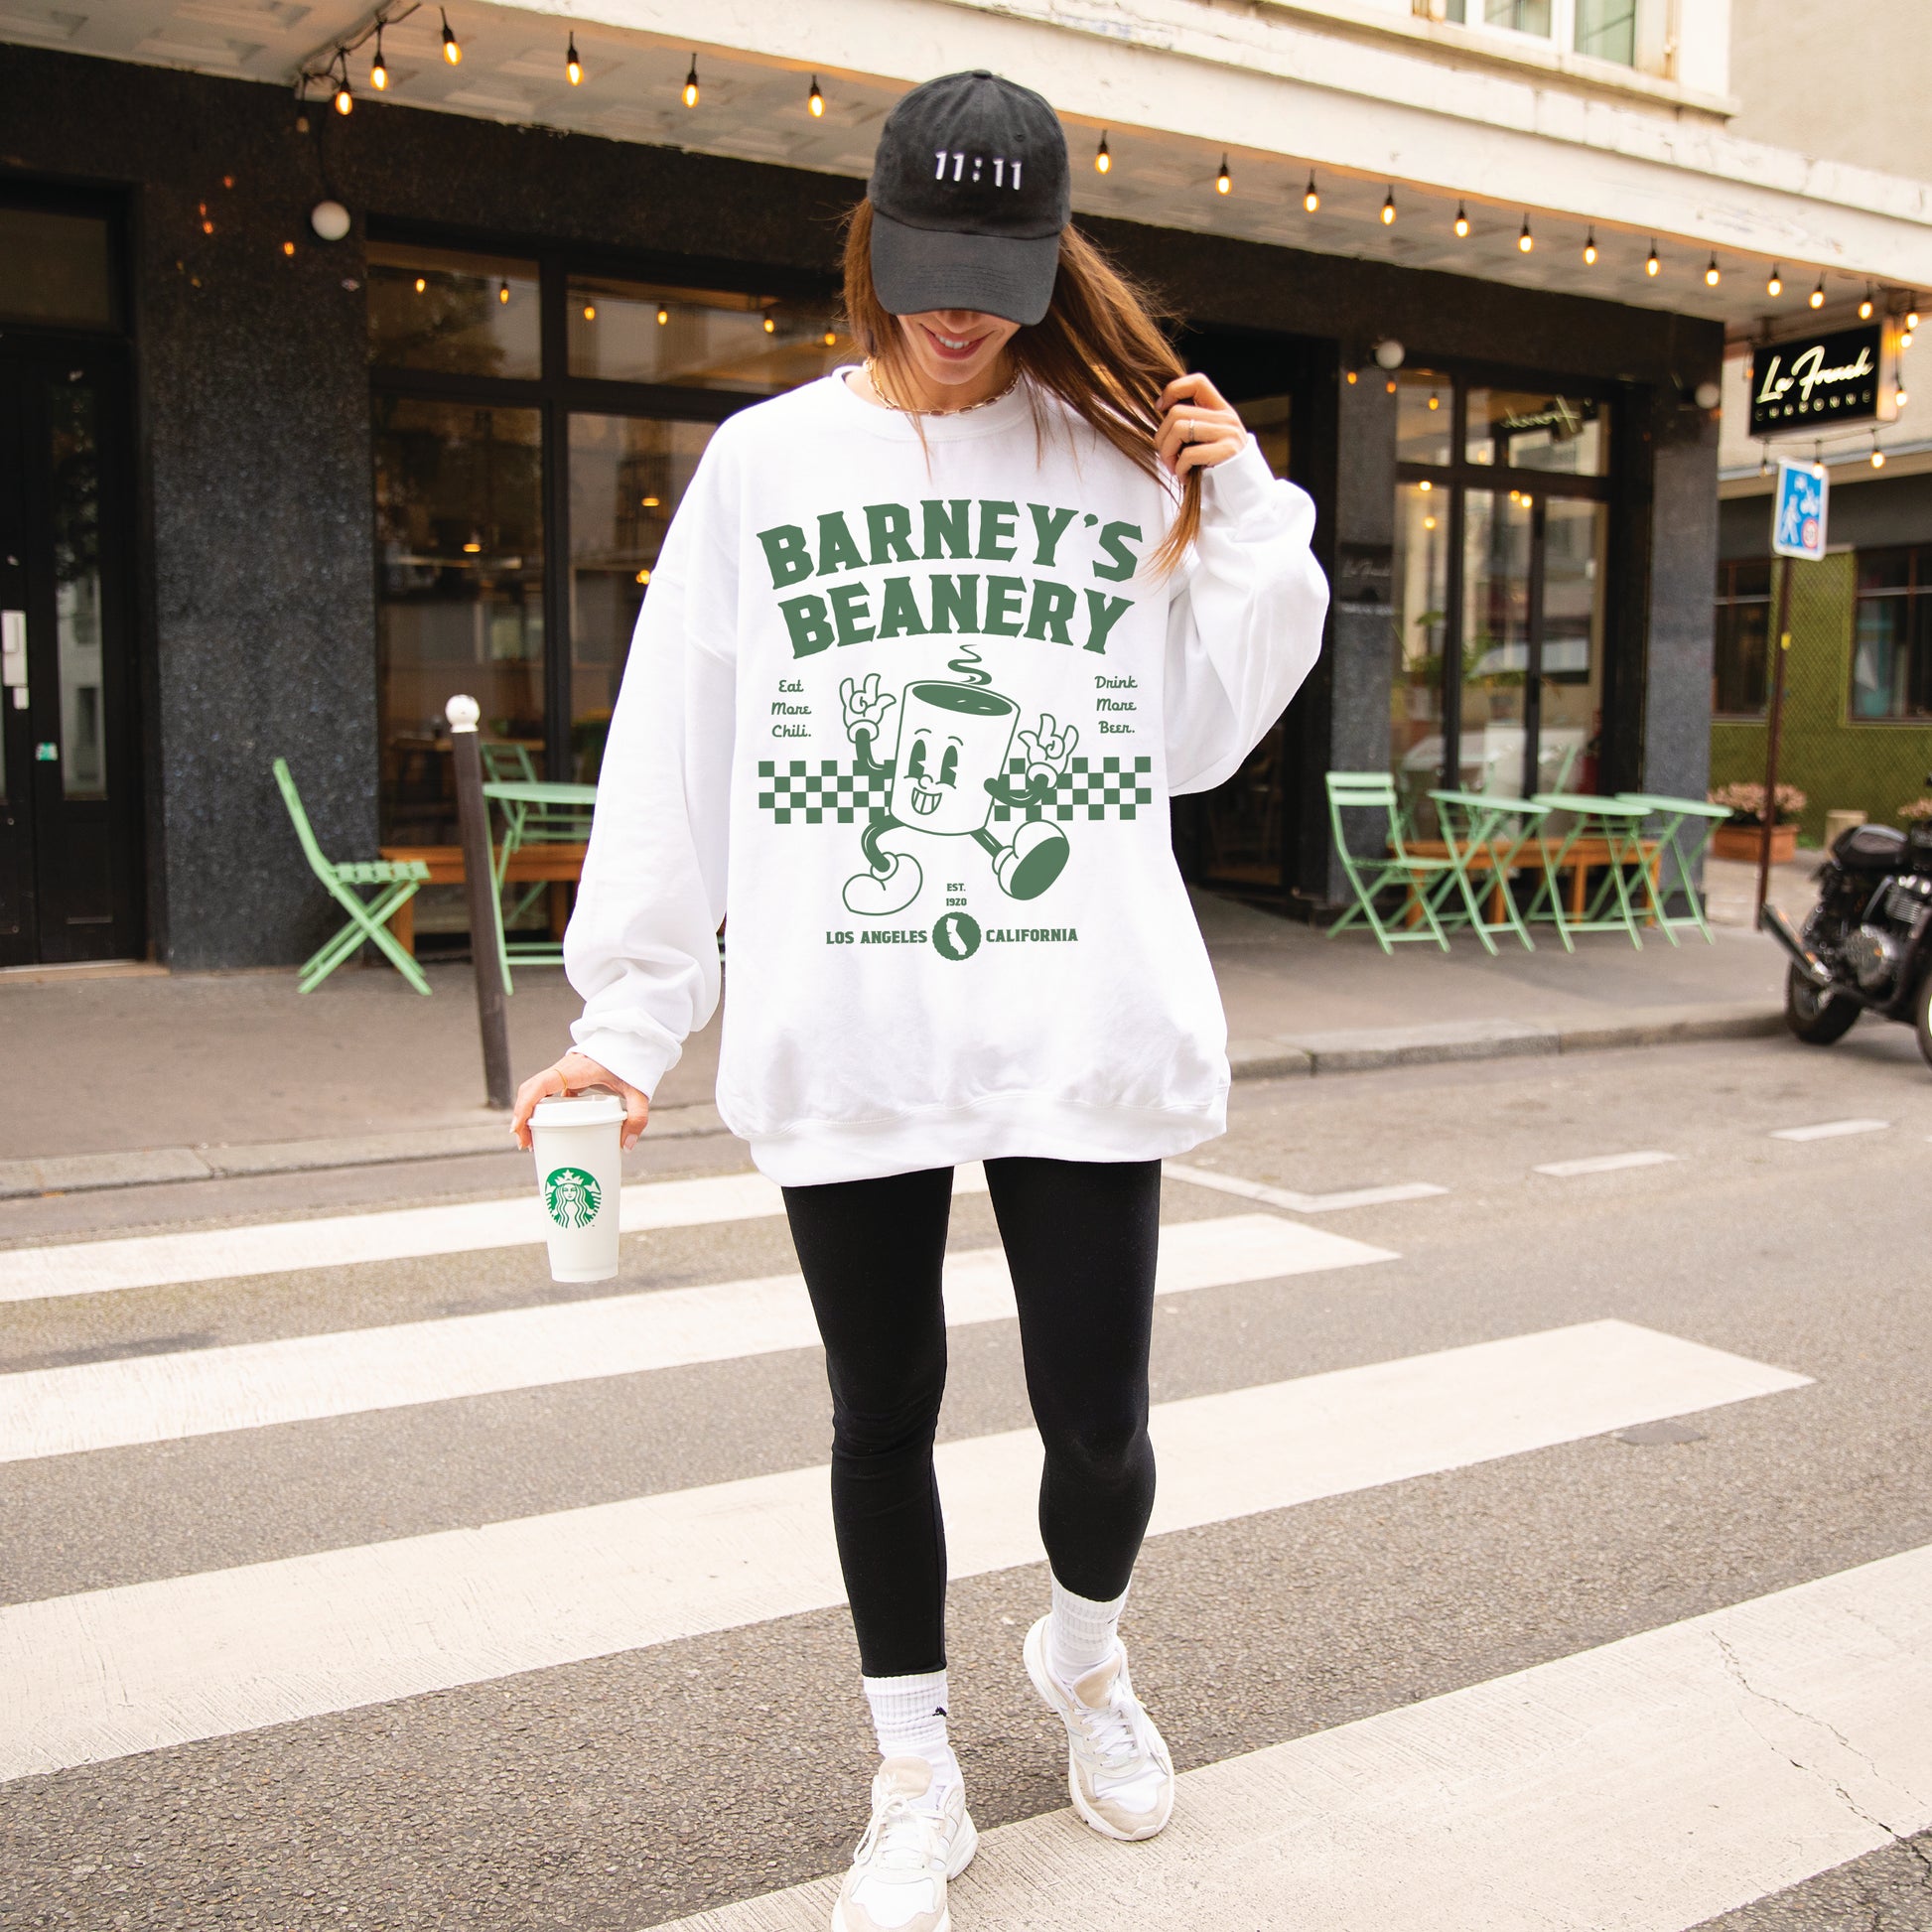 Eat More Chili. Drink More Beer. | BARNEY'S BEANERY Green - Women's Retro Graphic Sweatshirt | Green Graphics On White Gildan 18000, Front View Female Lifestyle Image